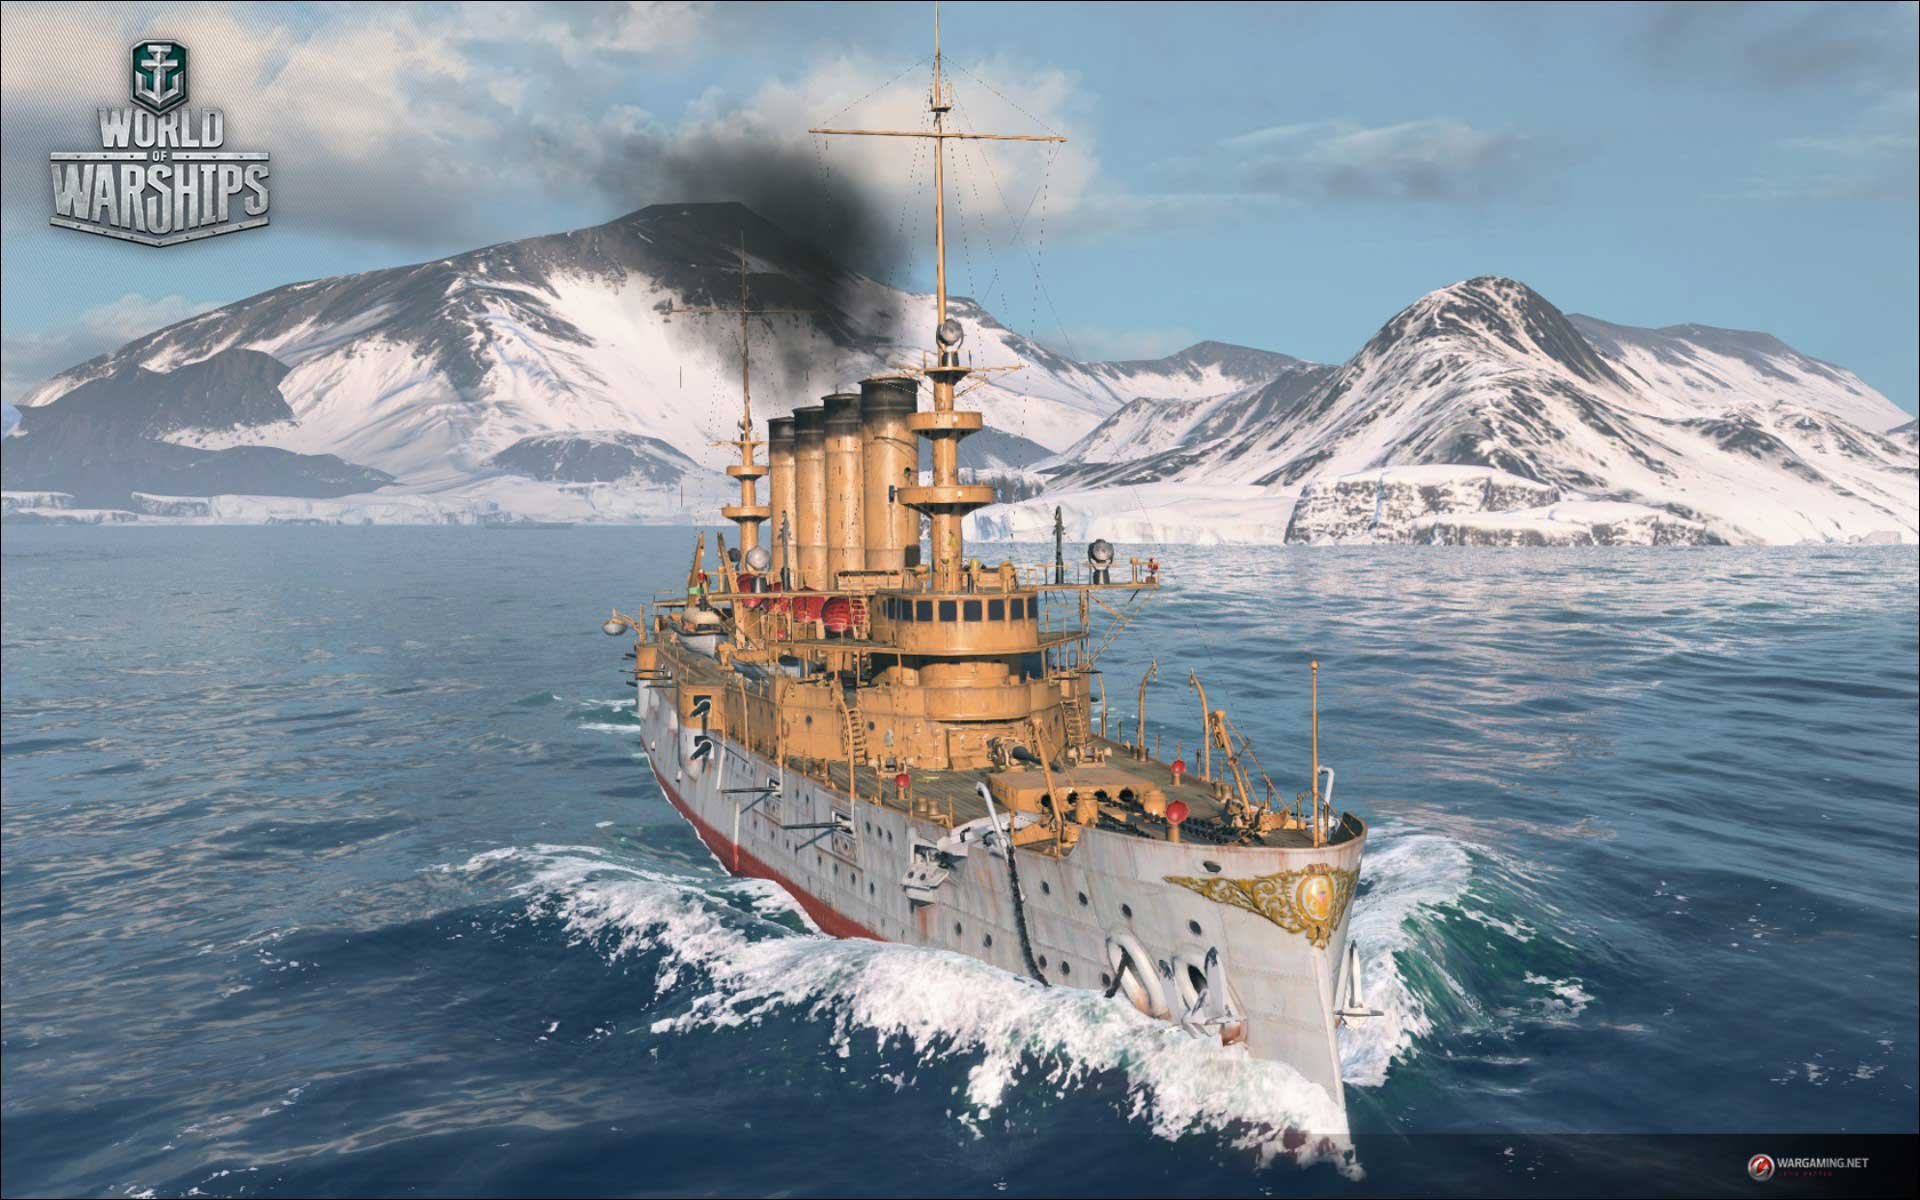 for ios download Pacific Warships